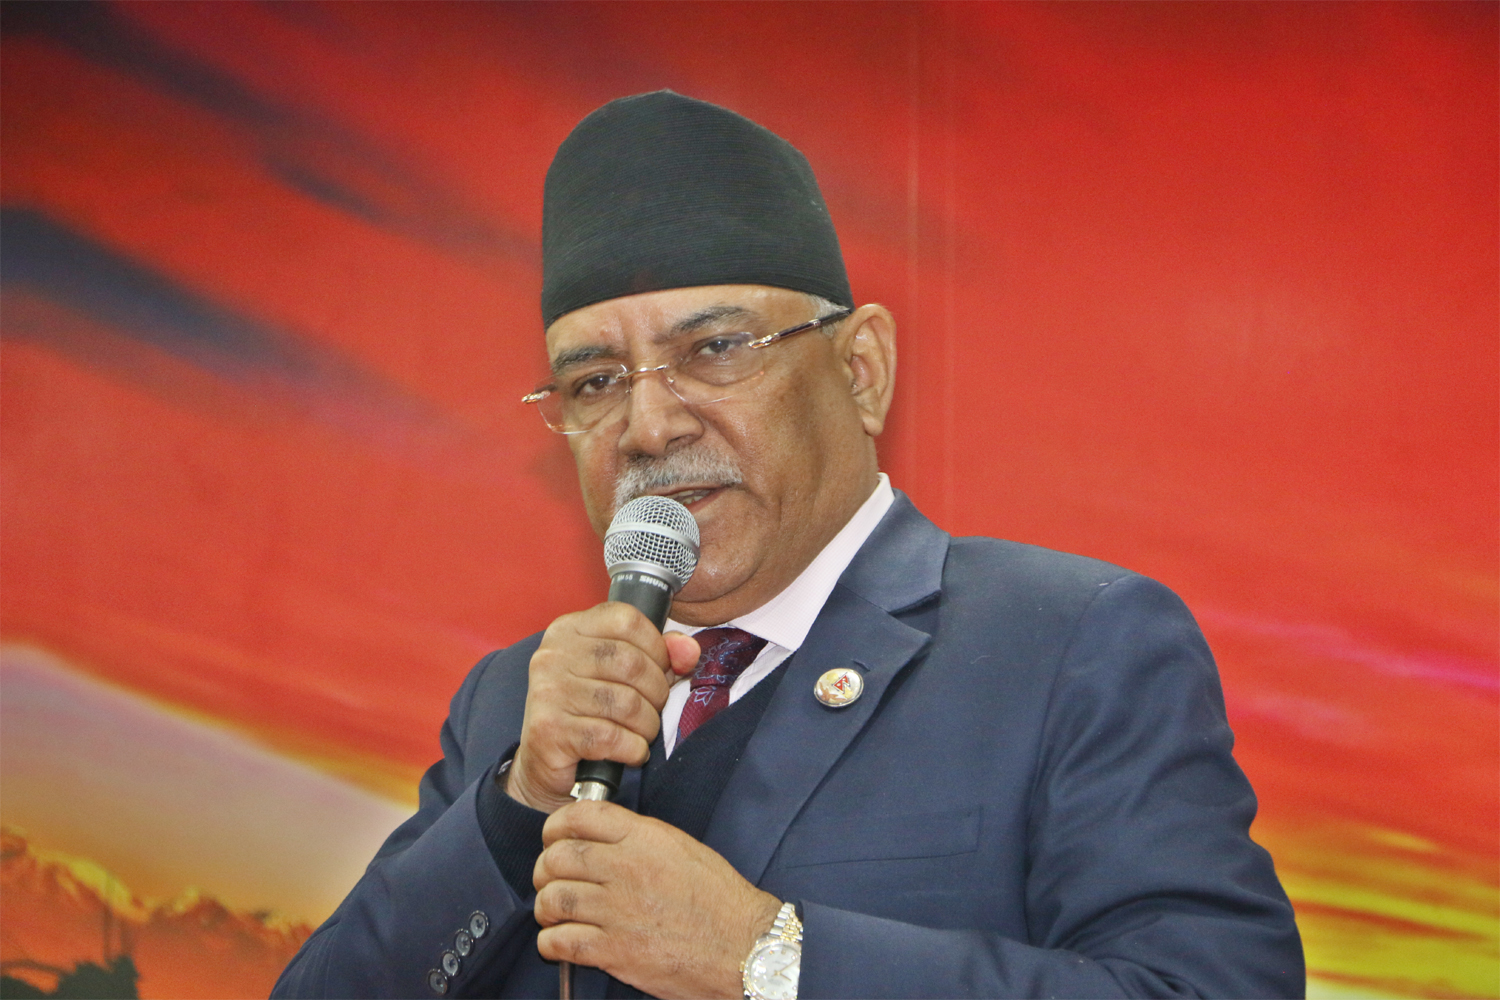 Kalapani issue will be complicated if internationalized: Dahal